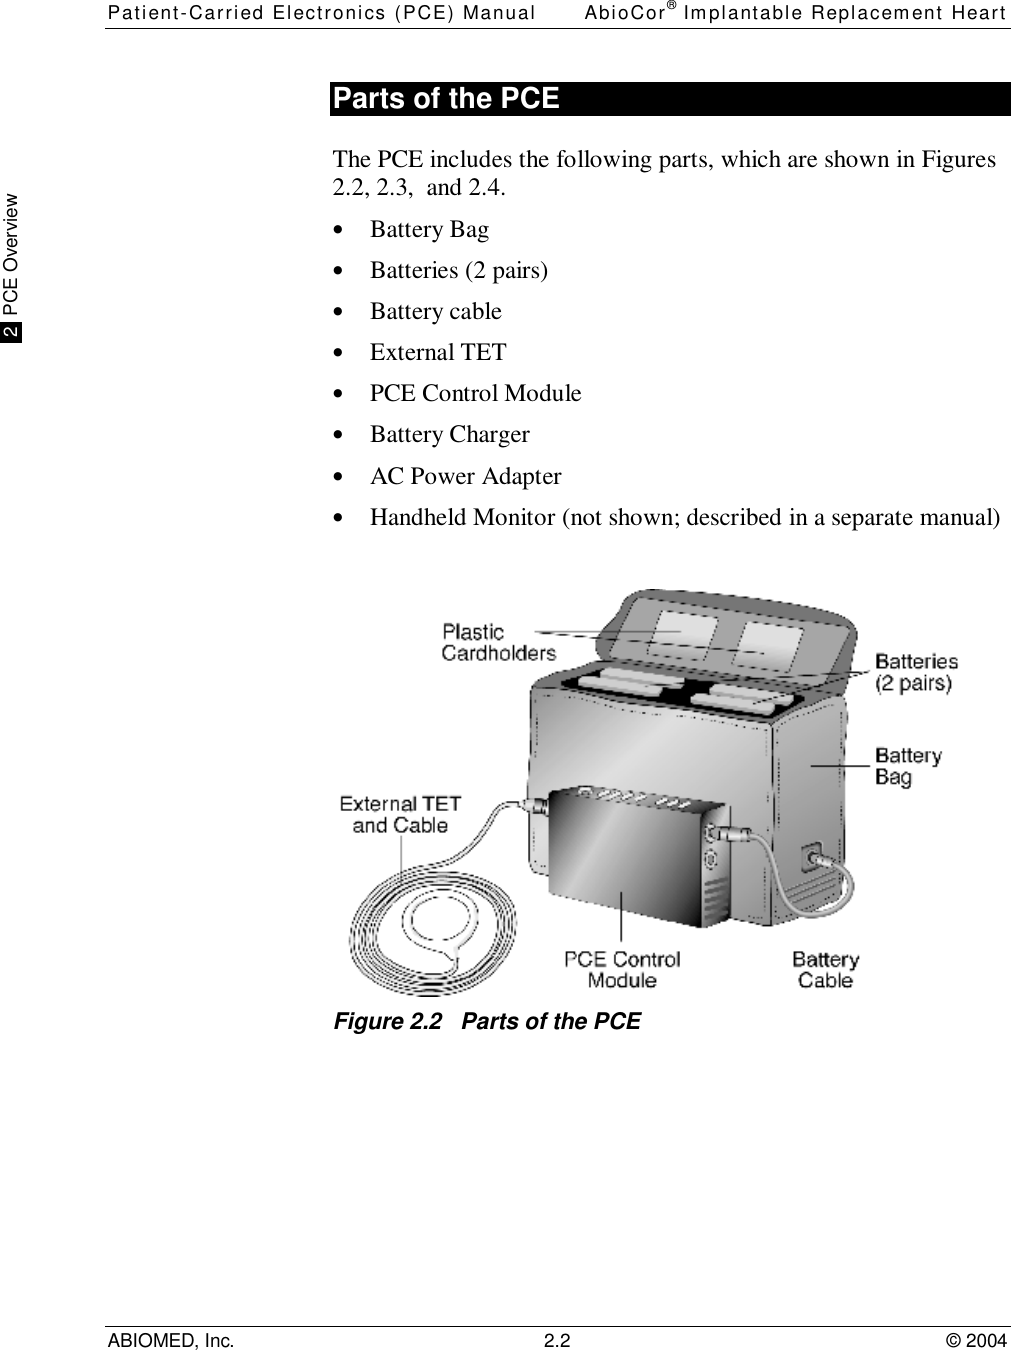 Patient-Carried Electronics (PCE) Manual AbioCor® Implantable Replacement HeartABIOMED, Inc. 2.2 © 2004 2  PCE OverviewParts of the PCE The PCE includes the following parts, which are shown in Figures2.2, 2.3,  and 2.4.• Battery Bag• Batteries (2 pairs)• Battery cable• External TET• PCE Control Module• Battery Charger• AC Power Adapter• Handheld Monitor (not shown; described in a separate manual)Figure 2.2   Parts of the PCE